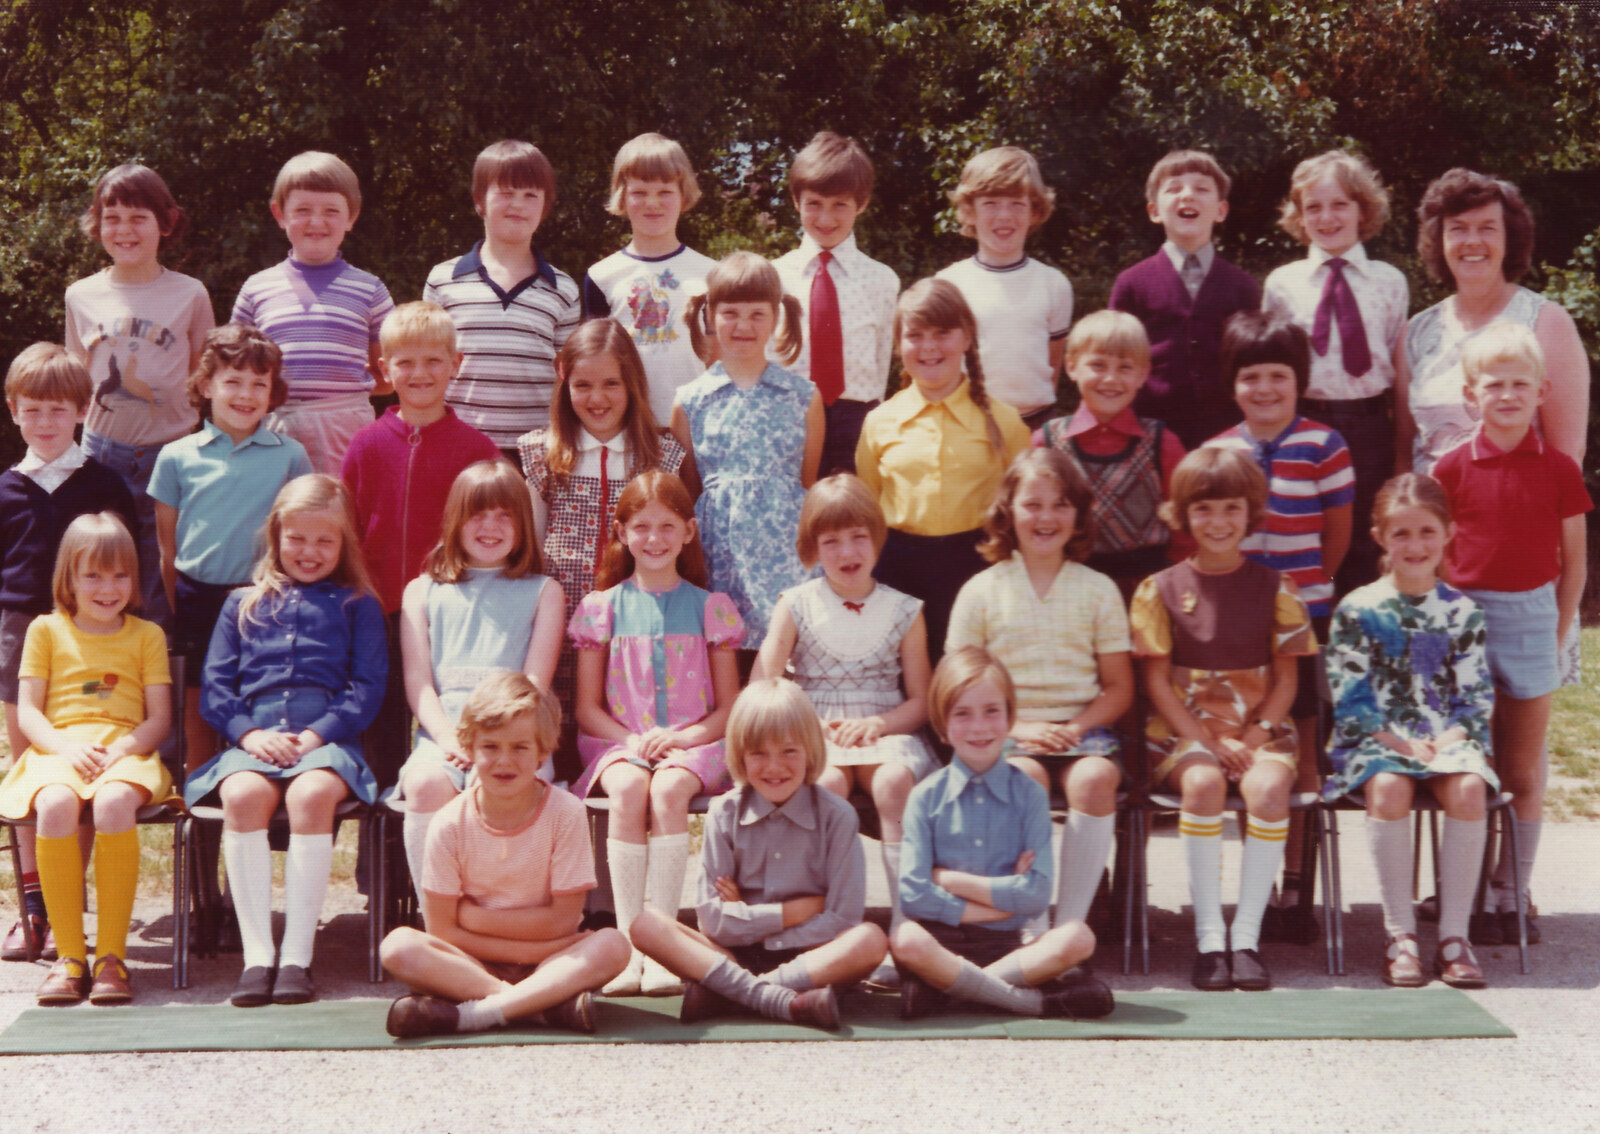 Nosher's school photo, Offley County, with maybe Christopher Leigh to the right from Family History: The 1970s, Timperley and Sandbach, Cheshire - 24th January 2020